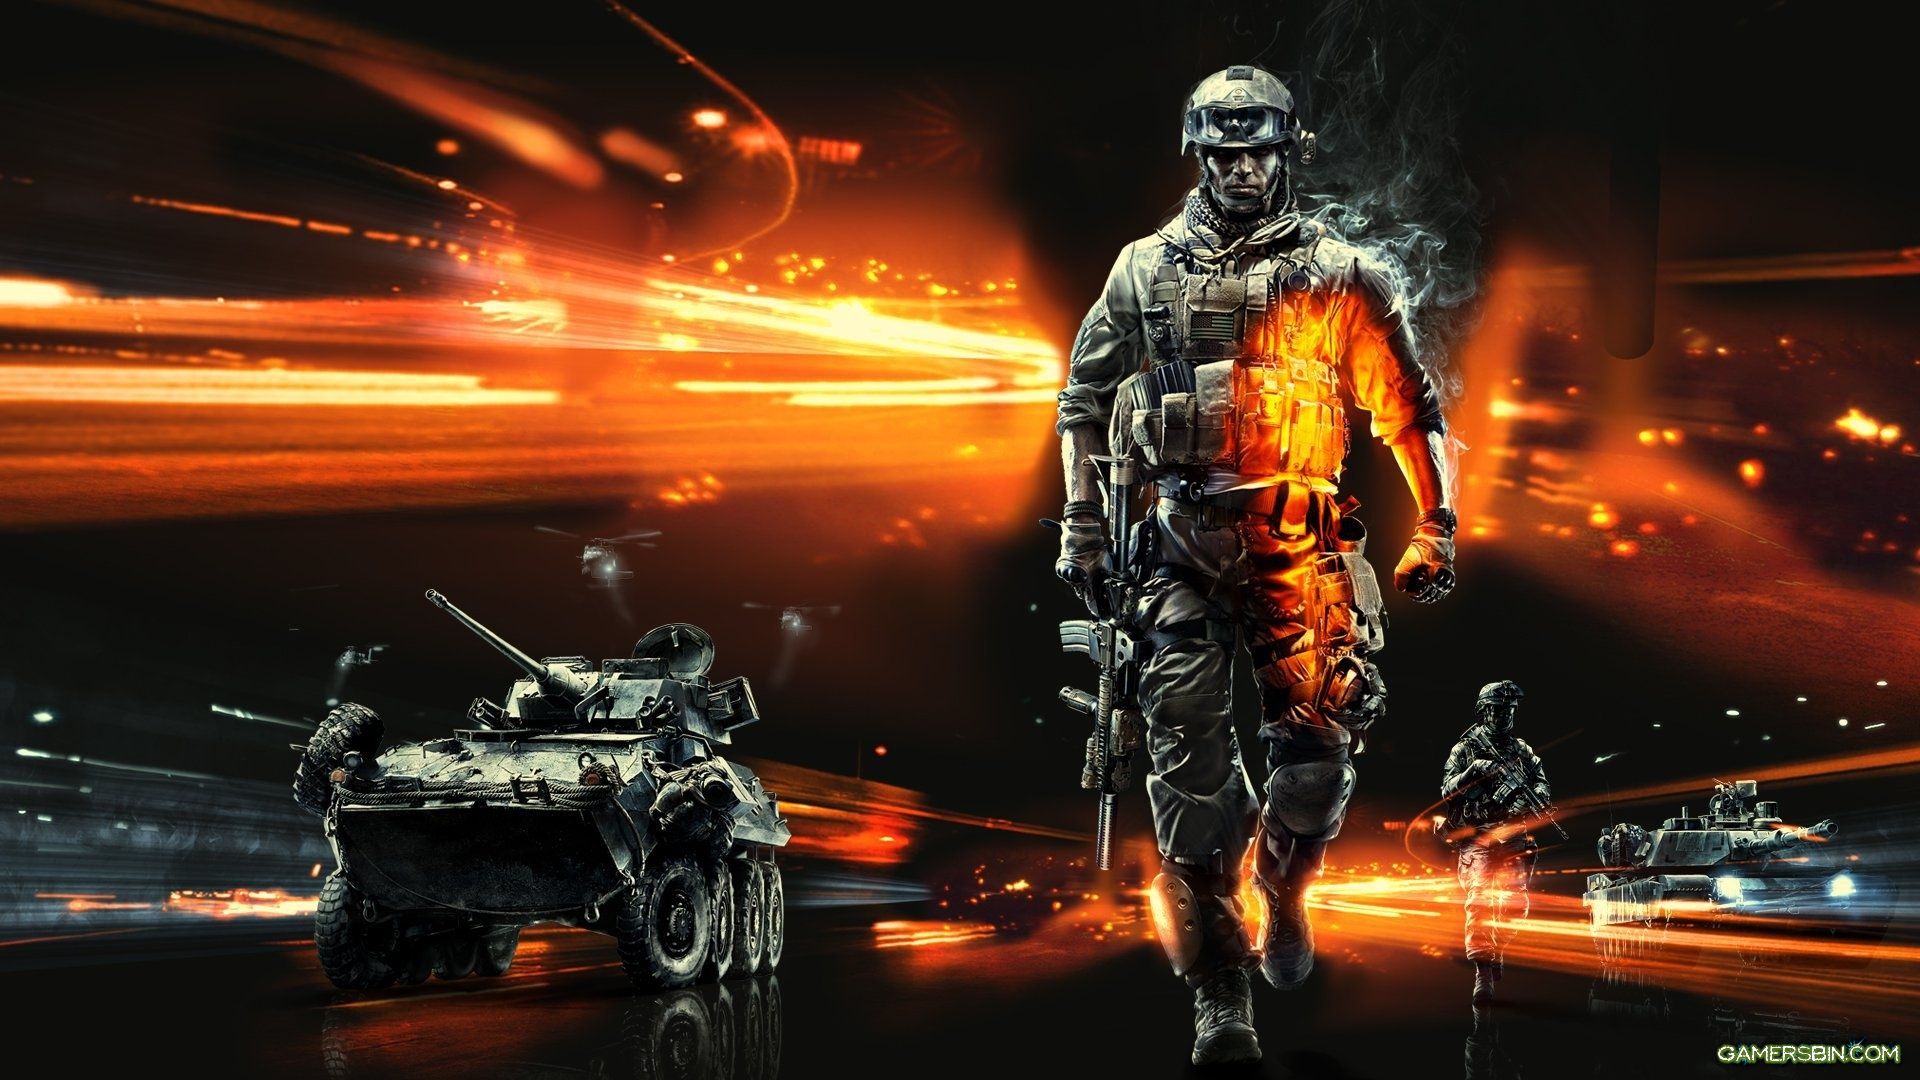 hd battlefield 3 wallpapers battlefield wallpaper hd soldiers arms 1920x1080